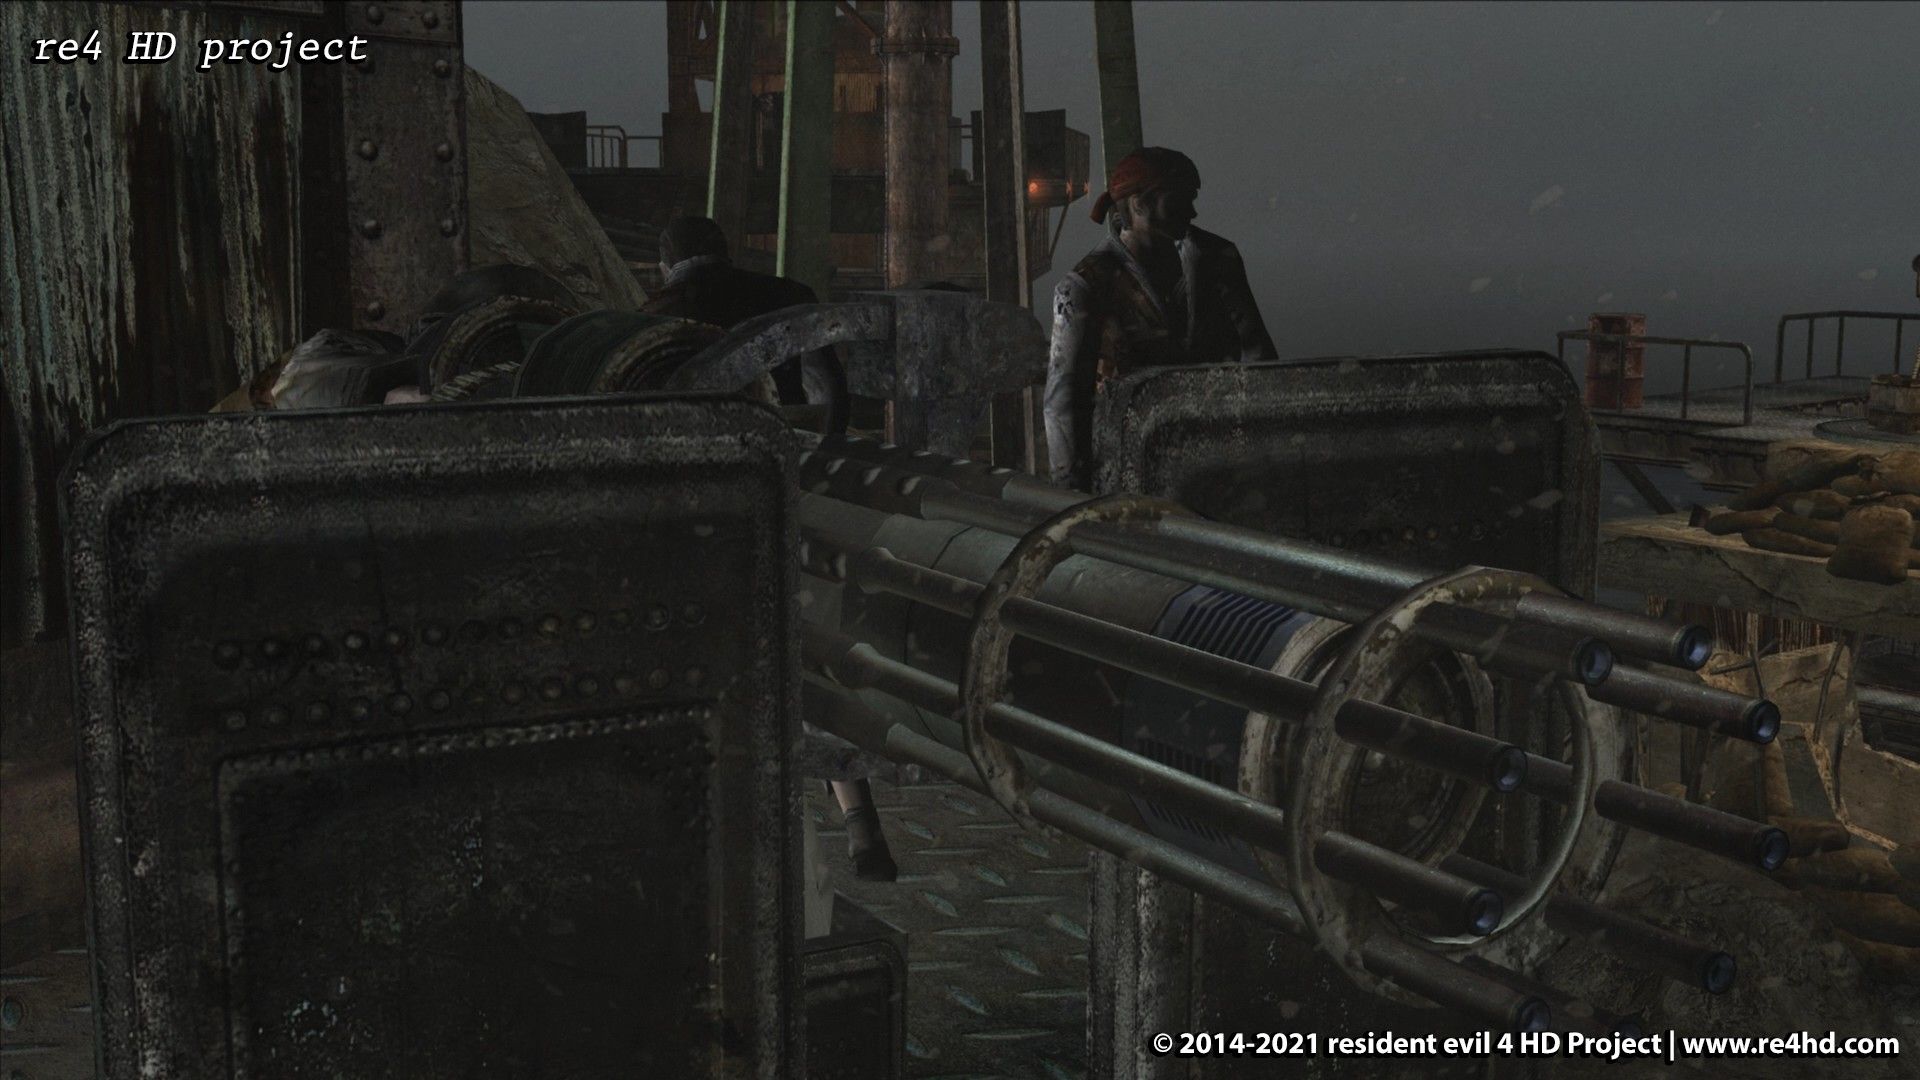 Resident Evil 4 Hd Mod Delivers A Masterful Re Remaster After 8 Years